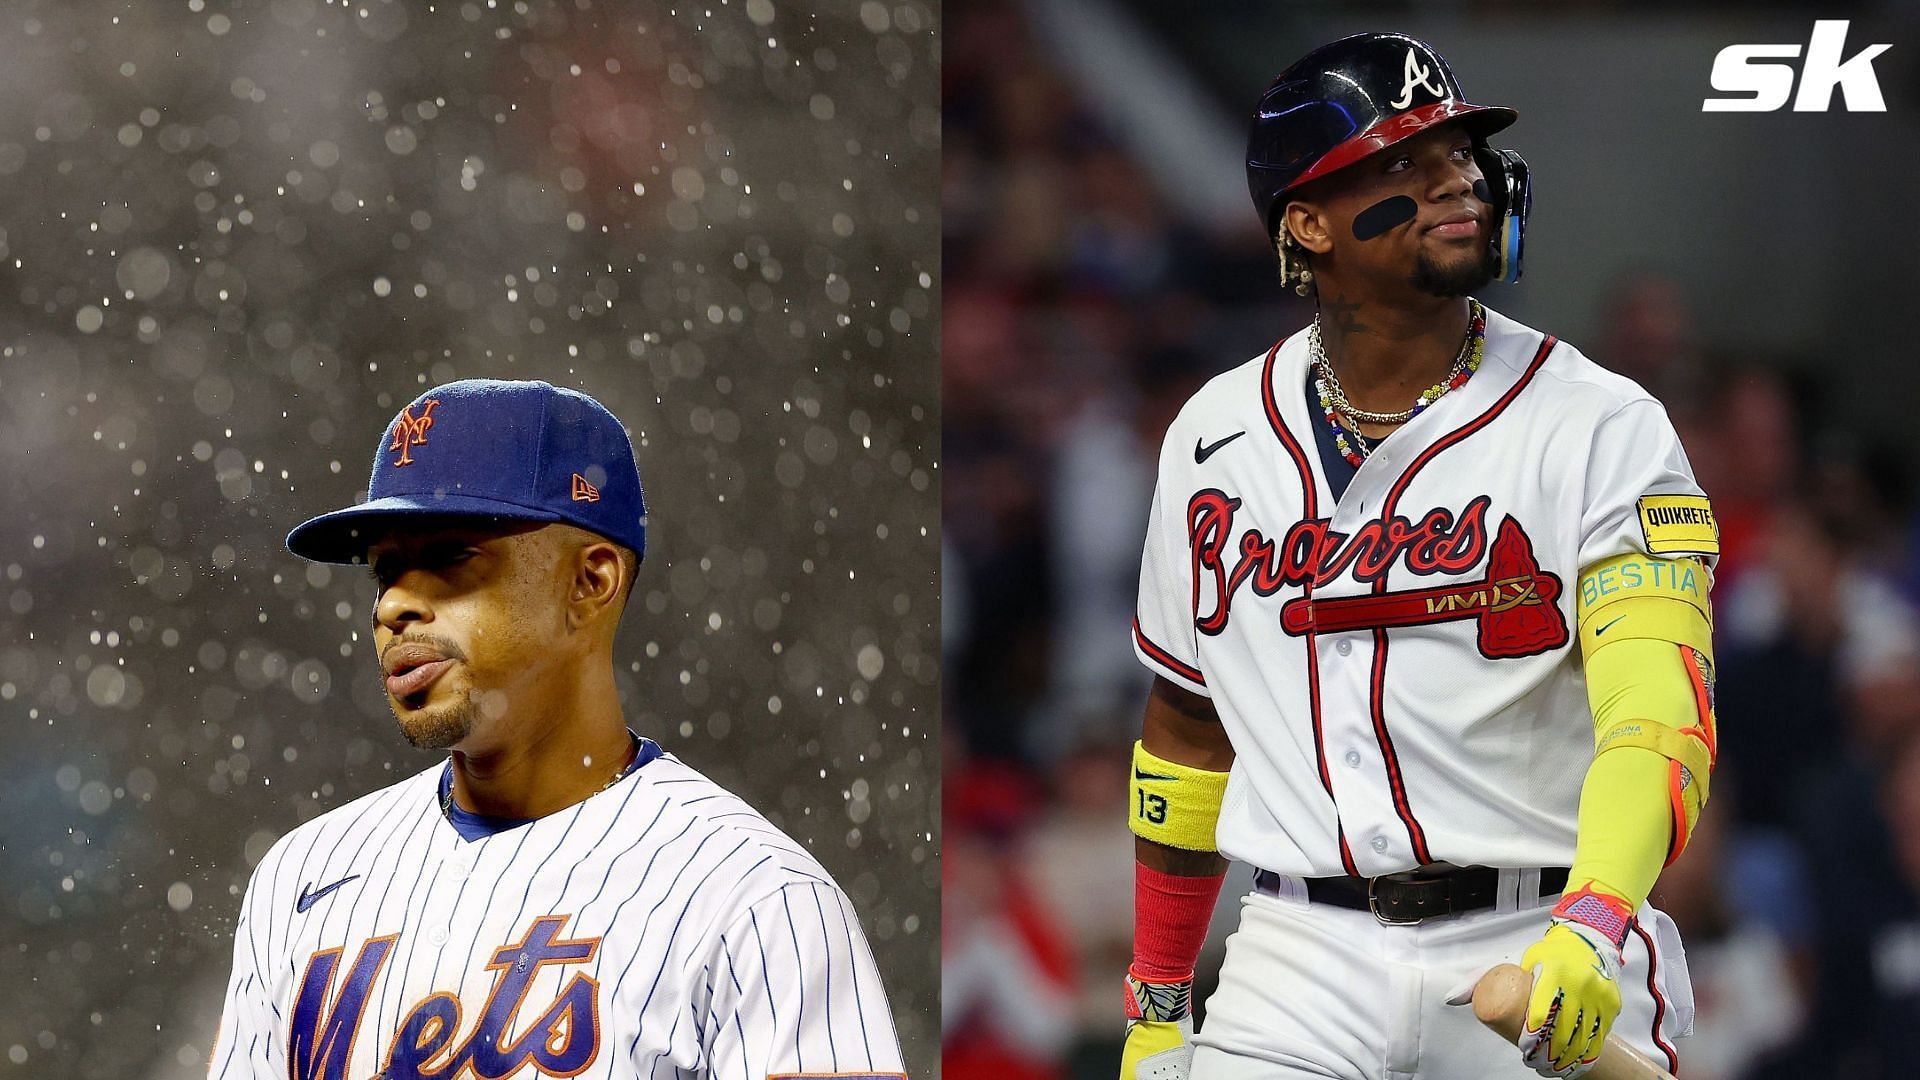 Atlanta Braves and New York Mets game Wednesday night postponed due to poor weather conditions